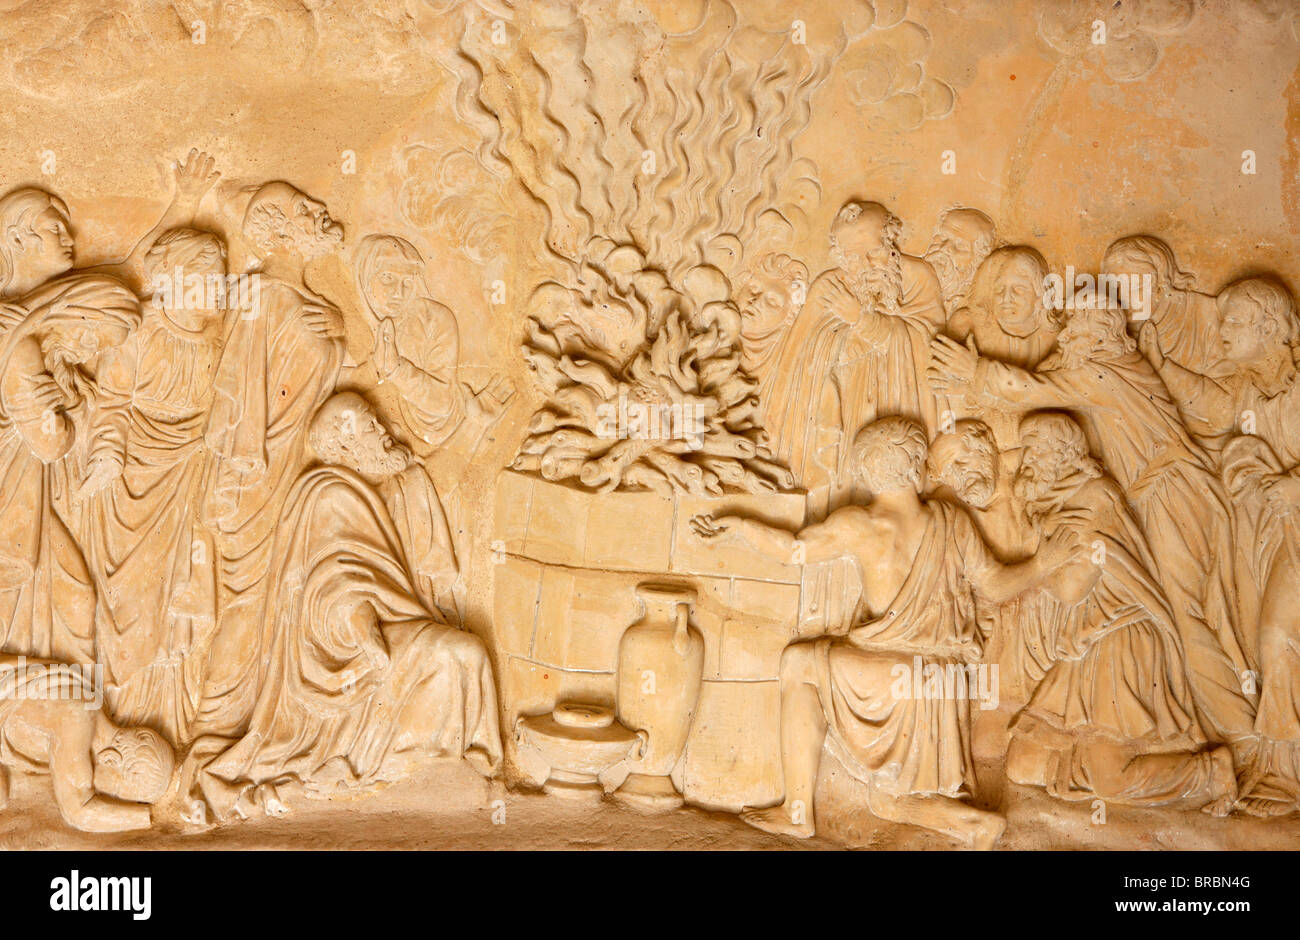 Sculpture depicting the priests of Baal at El Muhraqa, Israel Stock Photo